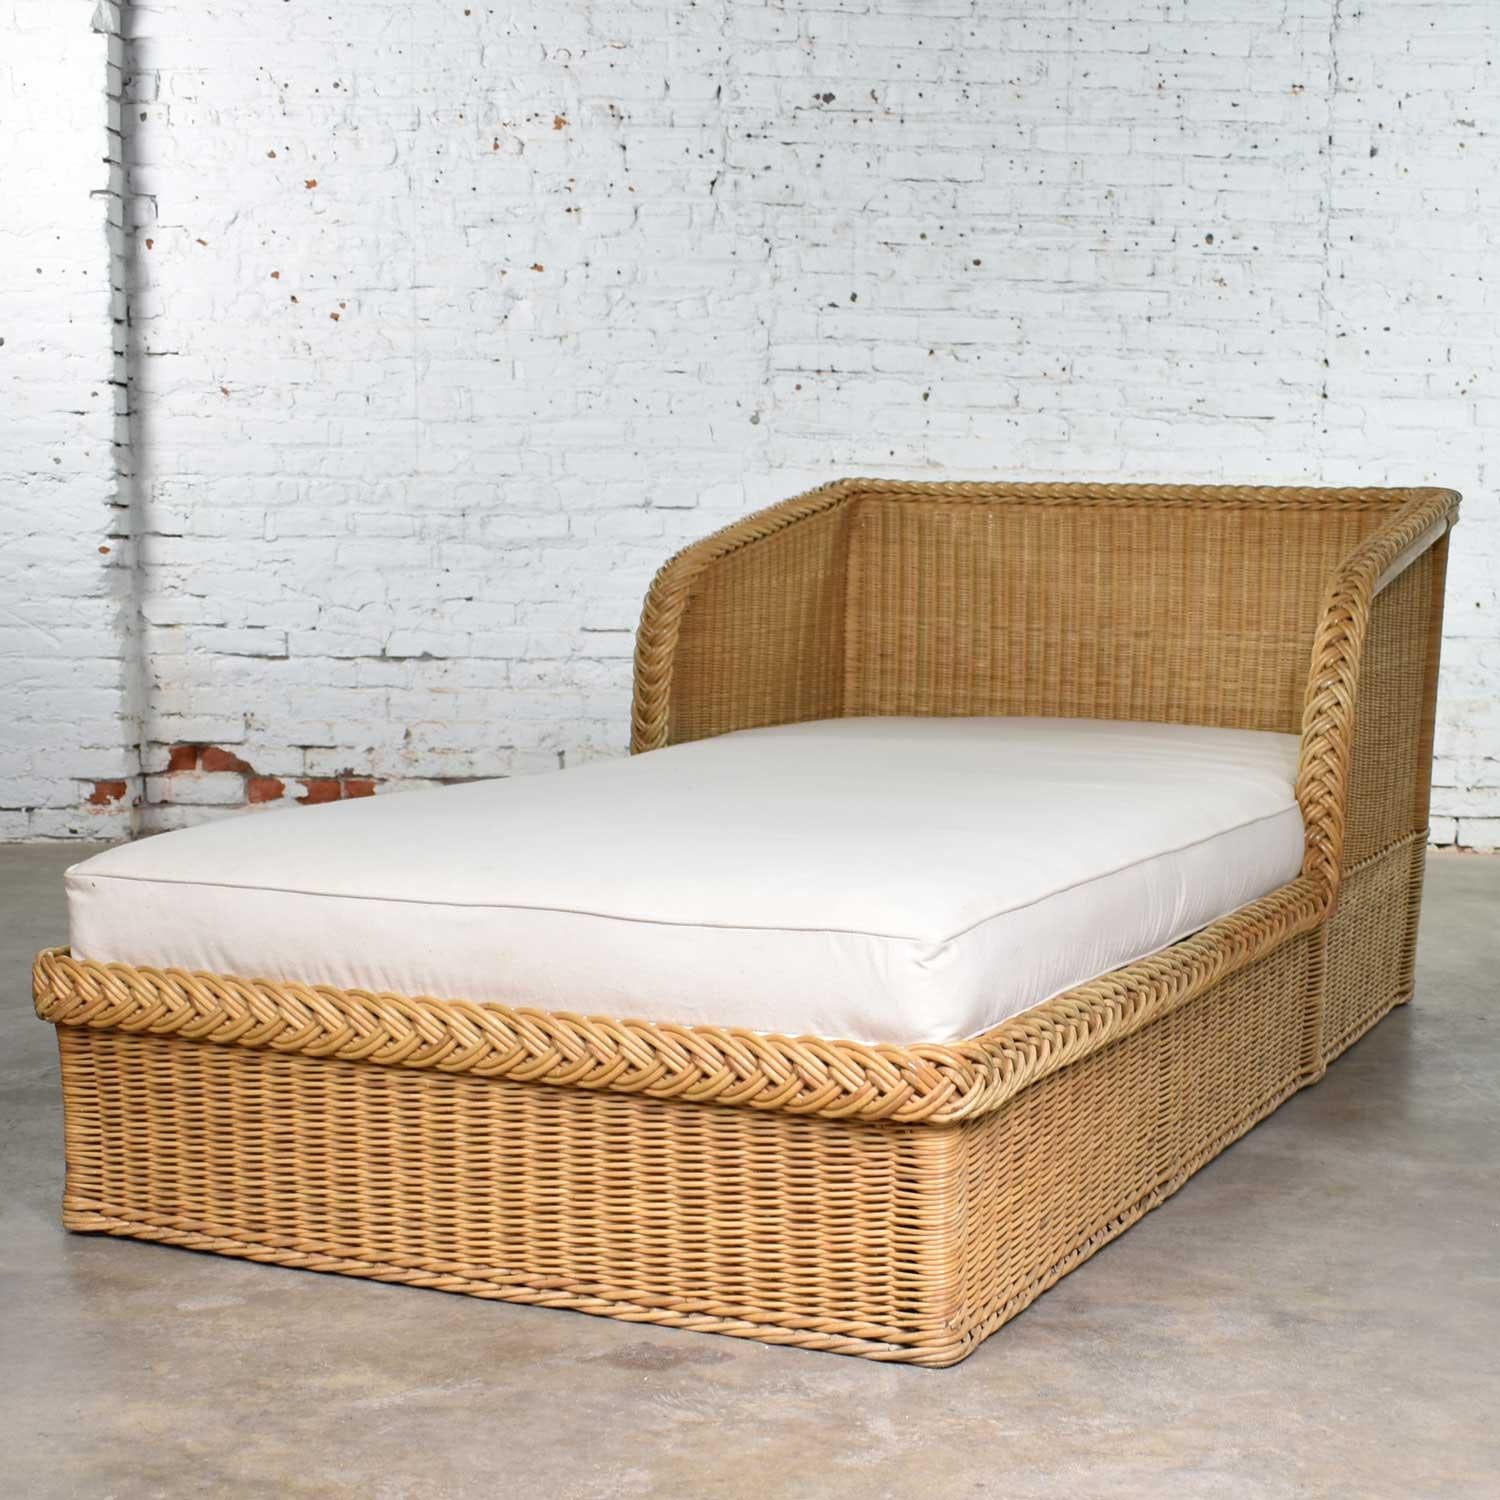 Fabric Wide Rattan Wicker Chaise by Bielecky Brothers, Inc. New White Canvas Upholstery